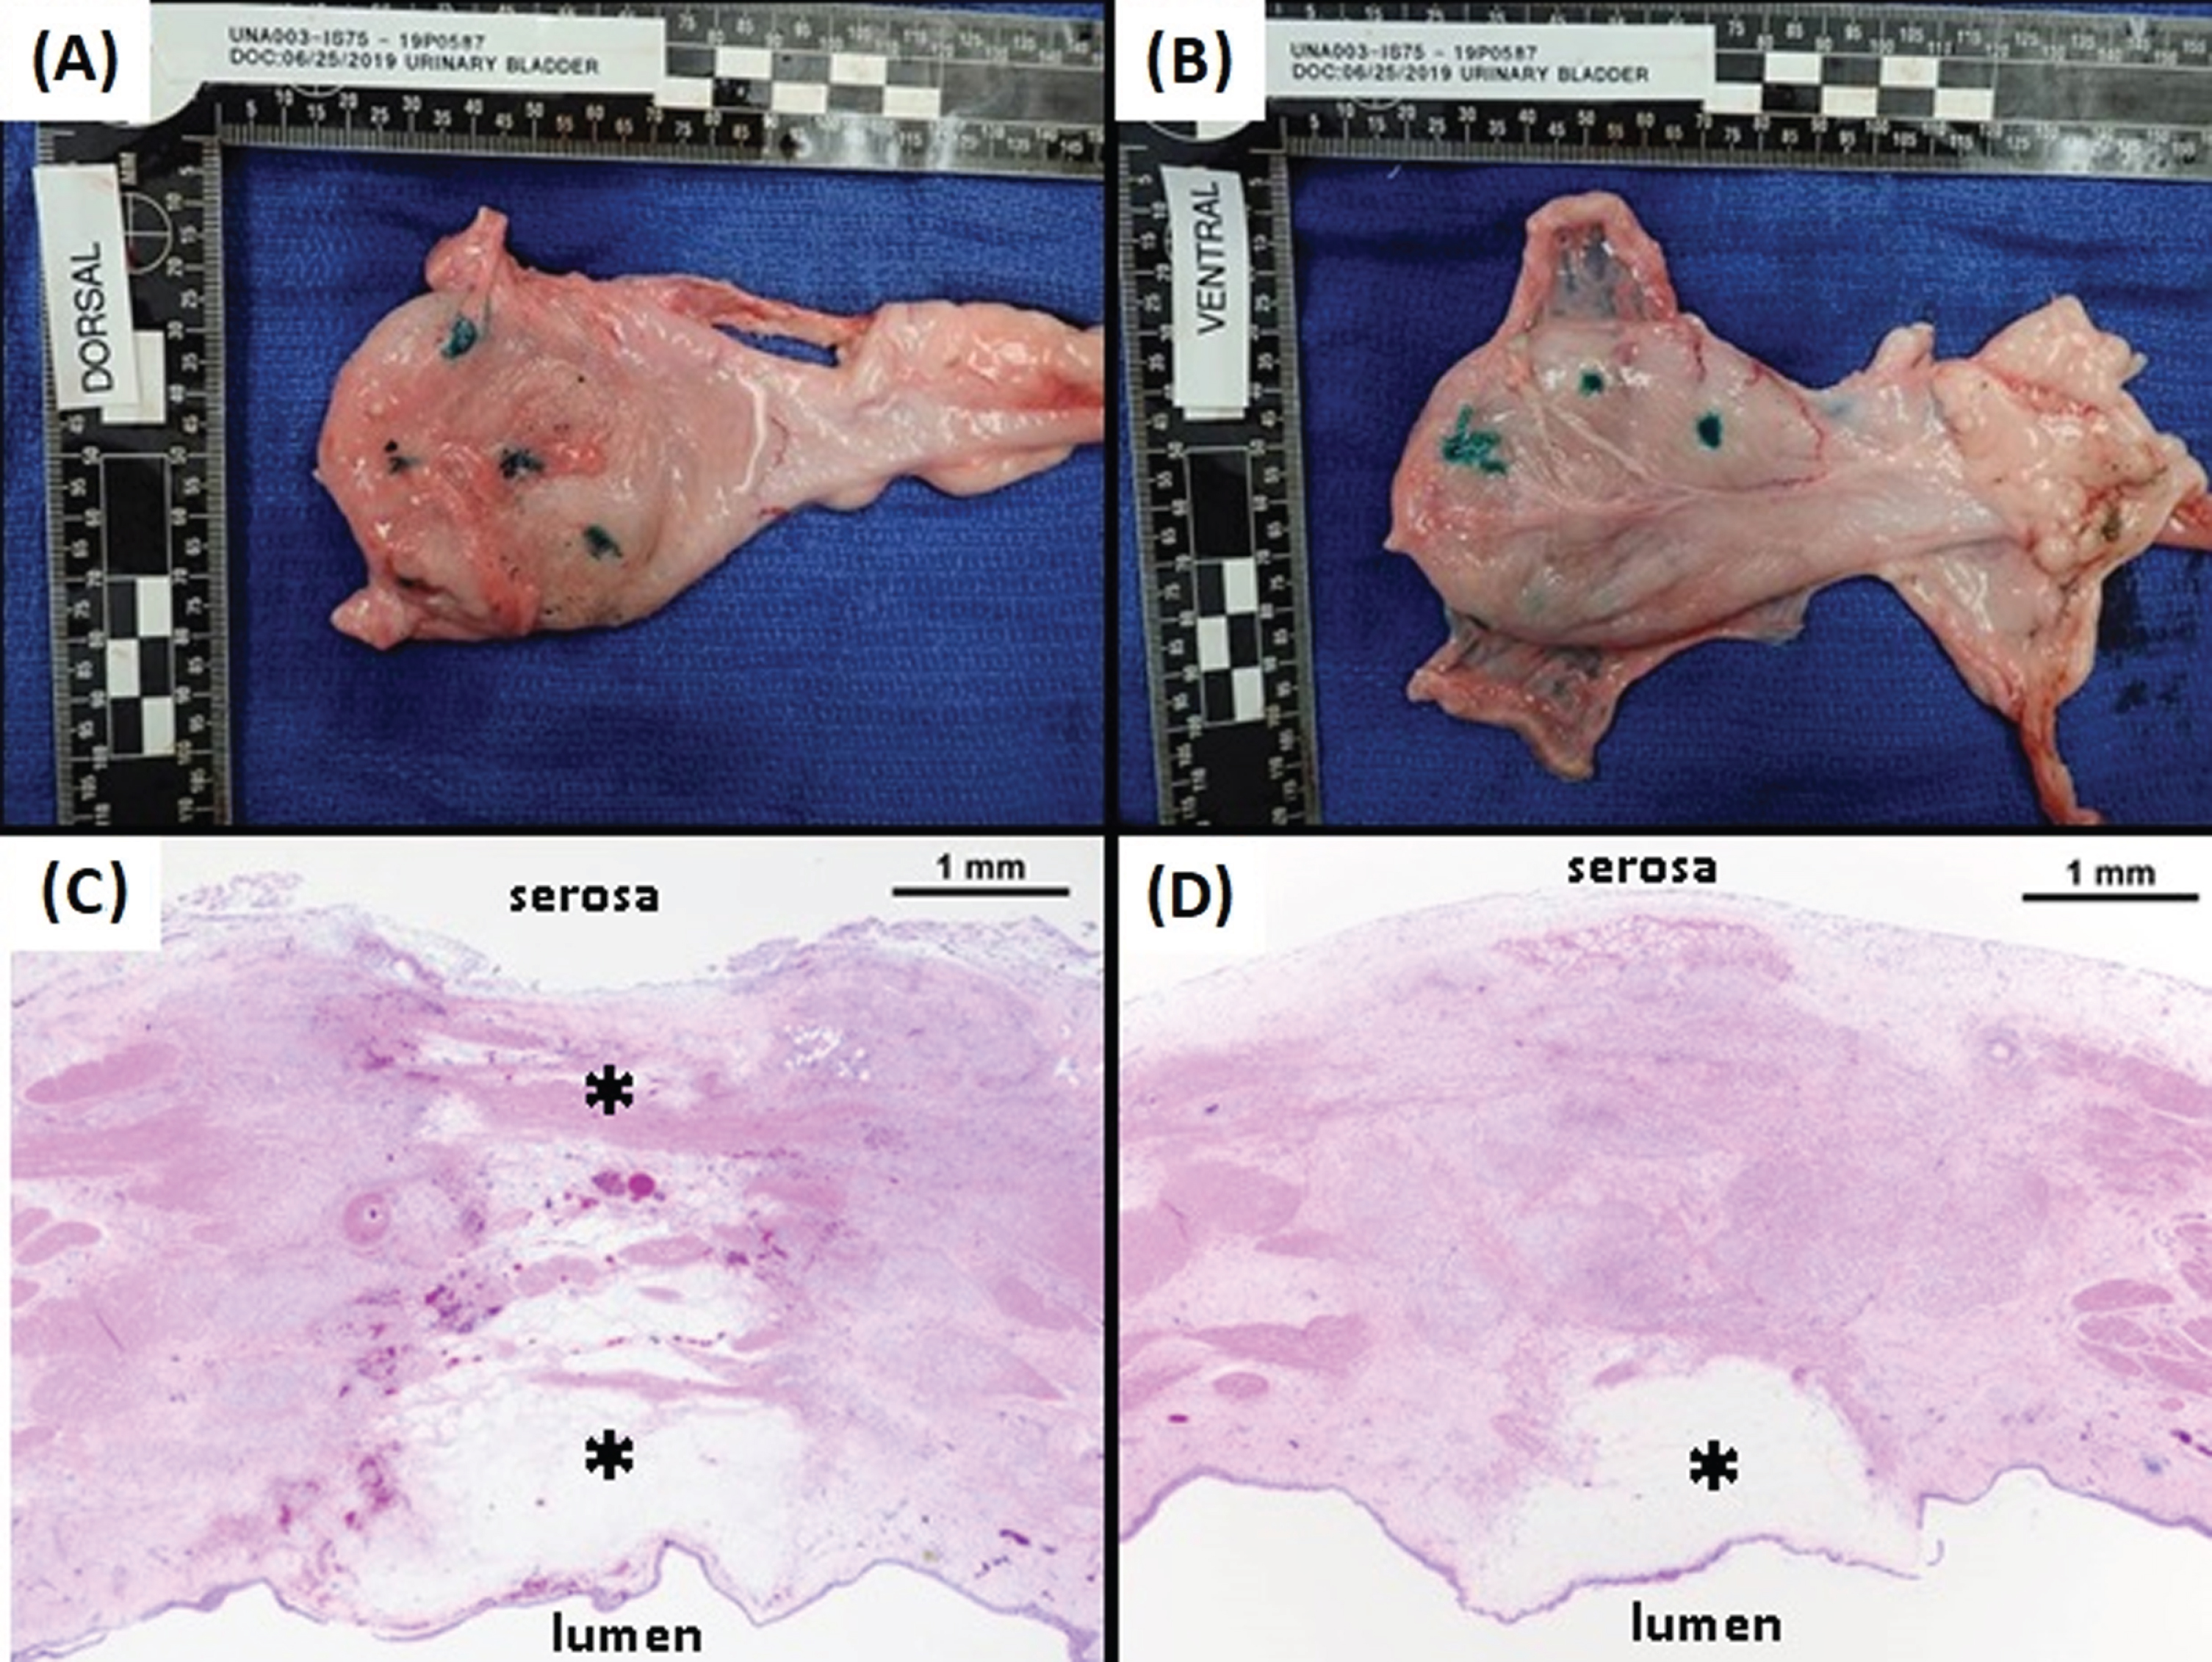 Gross Pathology and Histology of a Resected Bladder. At 7 days following the in vivo procedures bladders were resected and fixed. Gross pathology of the dorsal (A) and ventral (B) serosal surfaces of a bladder revealed numerous transmural lesions (inked sites). Histology (H & E staining) of two representative ablation sites show clearly defined lesions with visible edema and tissue disruption. Lesion depth was contingent on the freeze duration with a 60 sec freeze (C) resulting in ablation of the full thickness of the bladder wall and a 15 sec freeze (D) resulting in an ablative zone confined to the sub-mucosa.